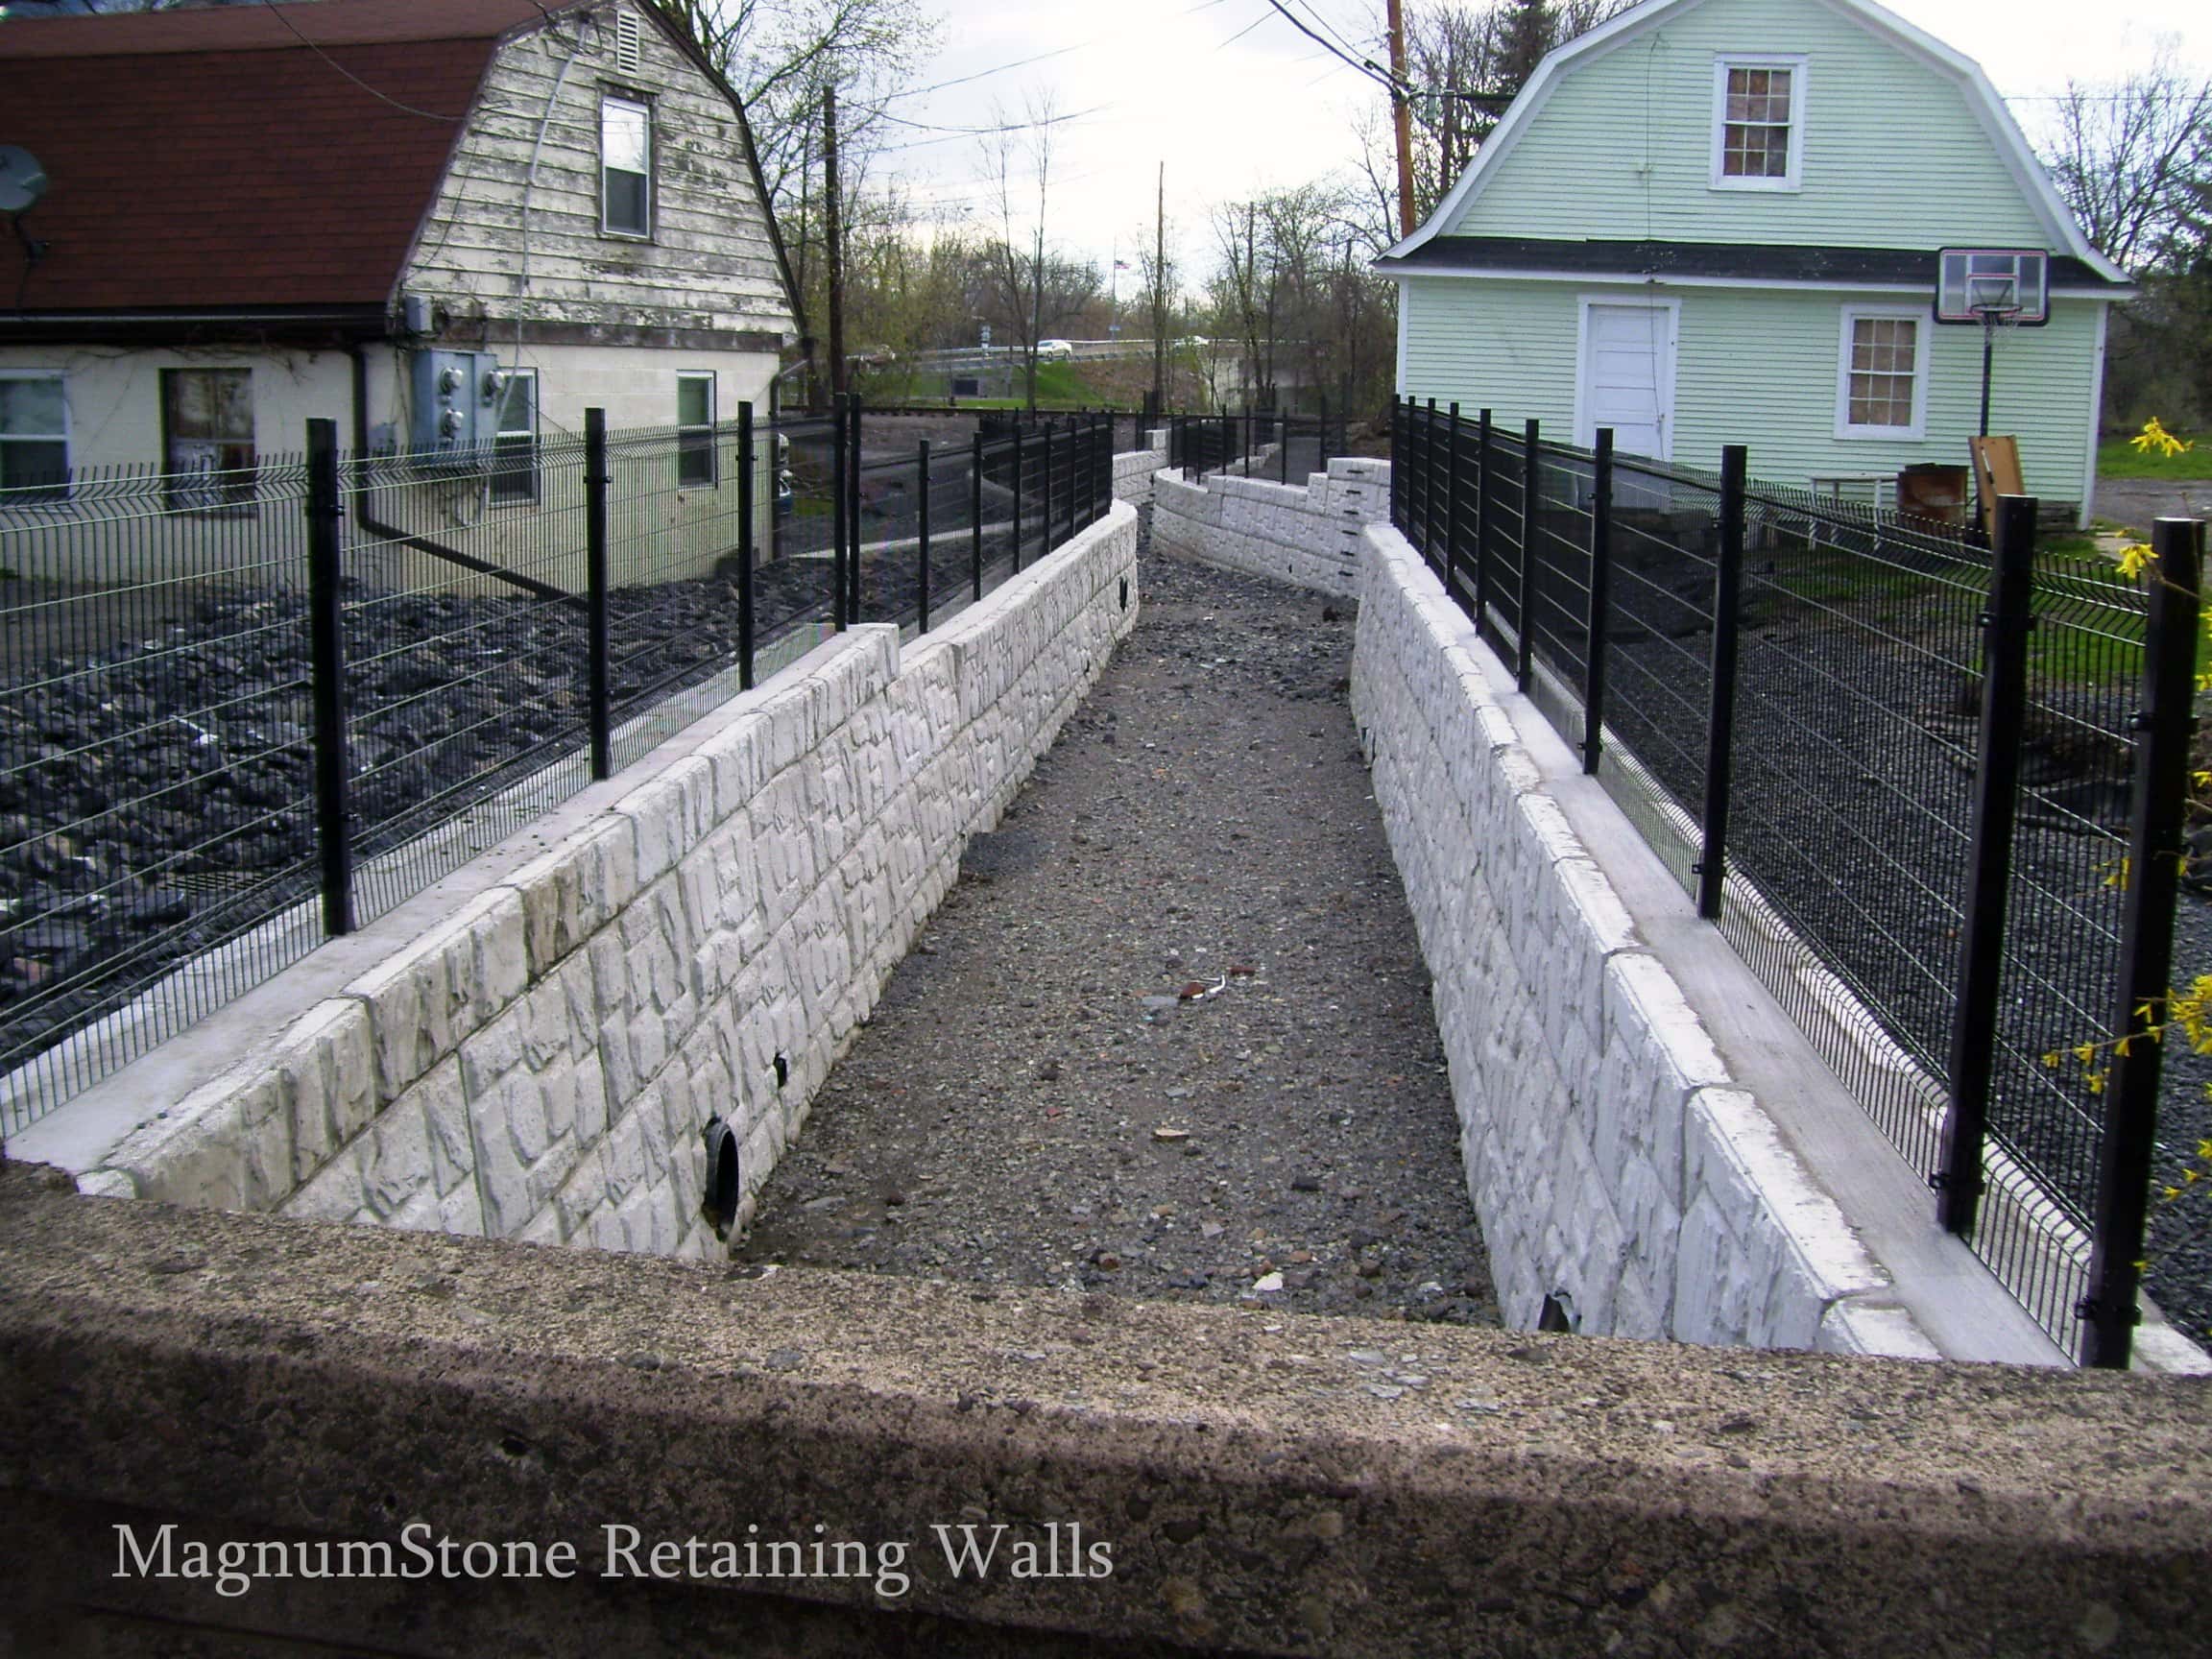 MagnumStone Stormwater Drainage System Retaining Walls